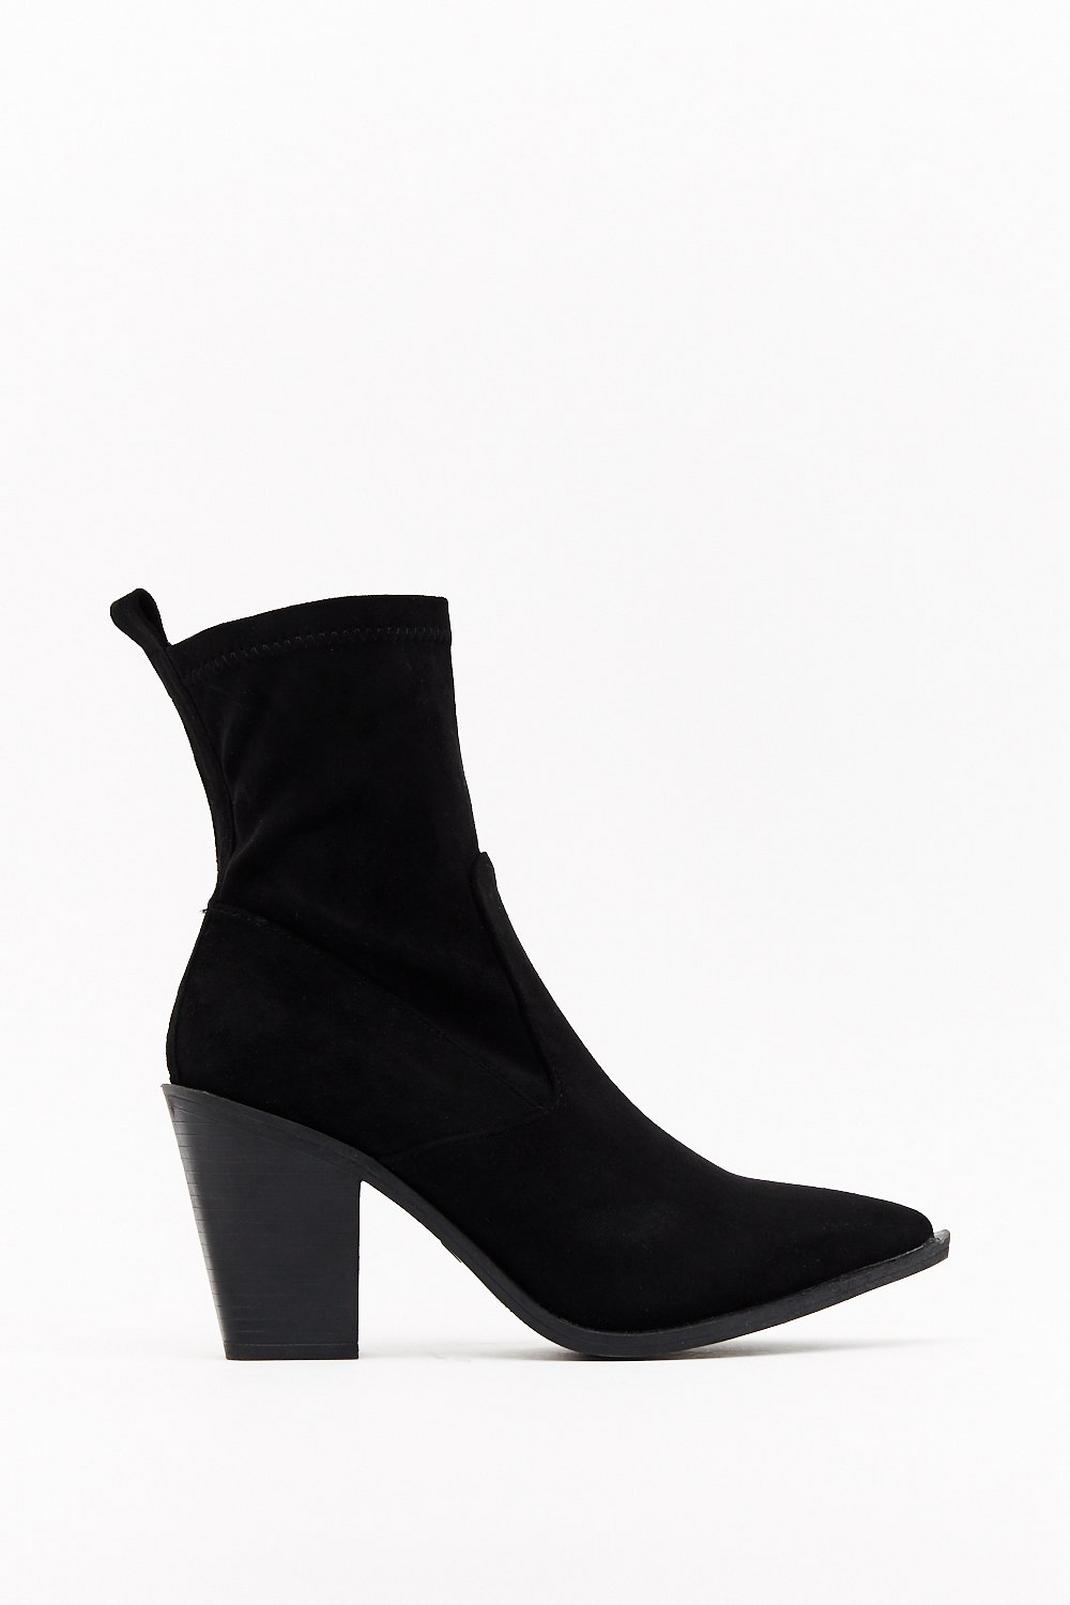 Match Faux Suede in Heaven Heeled Sock Boots image number 1